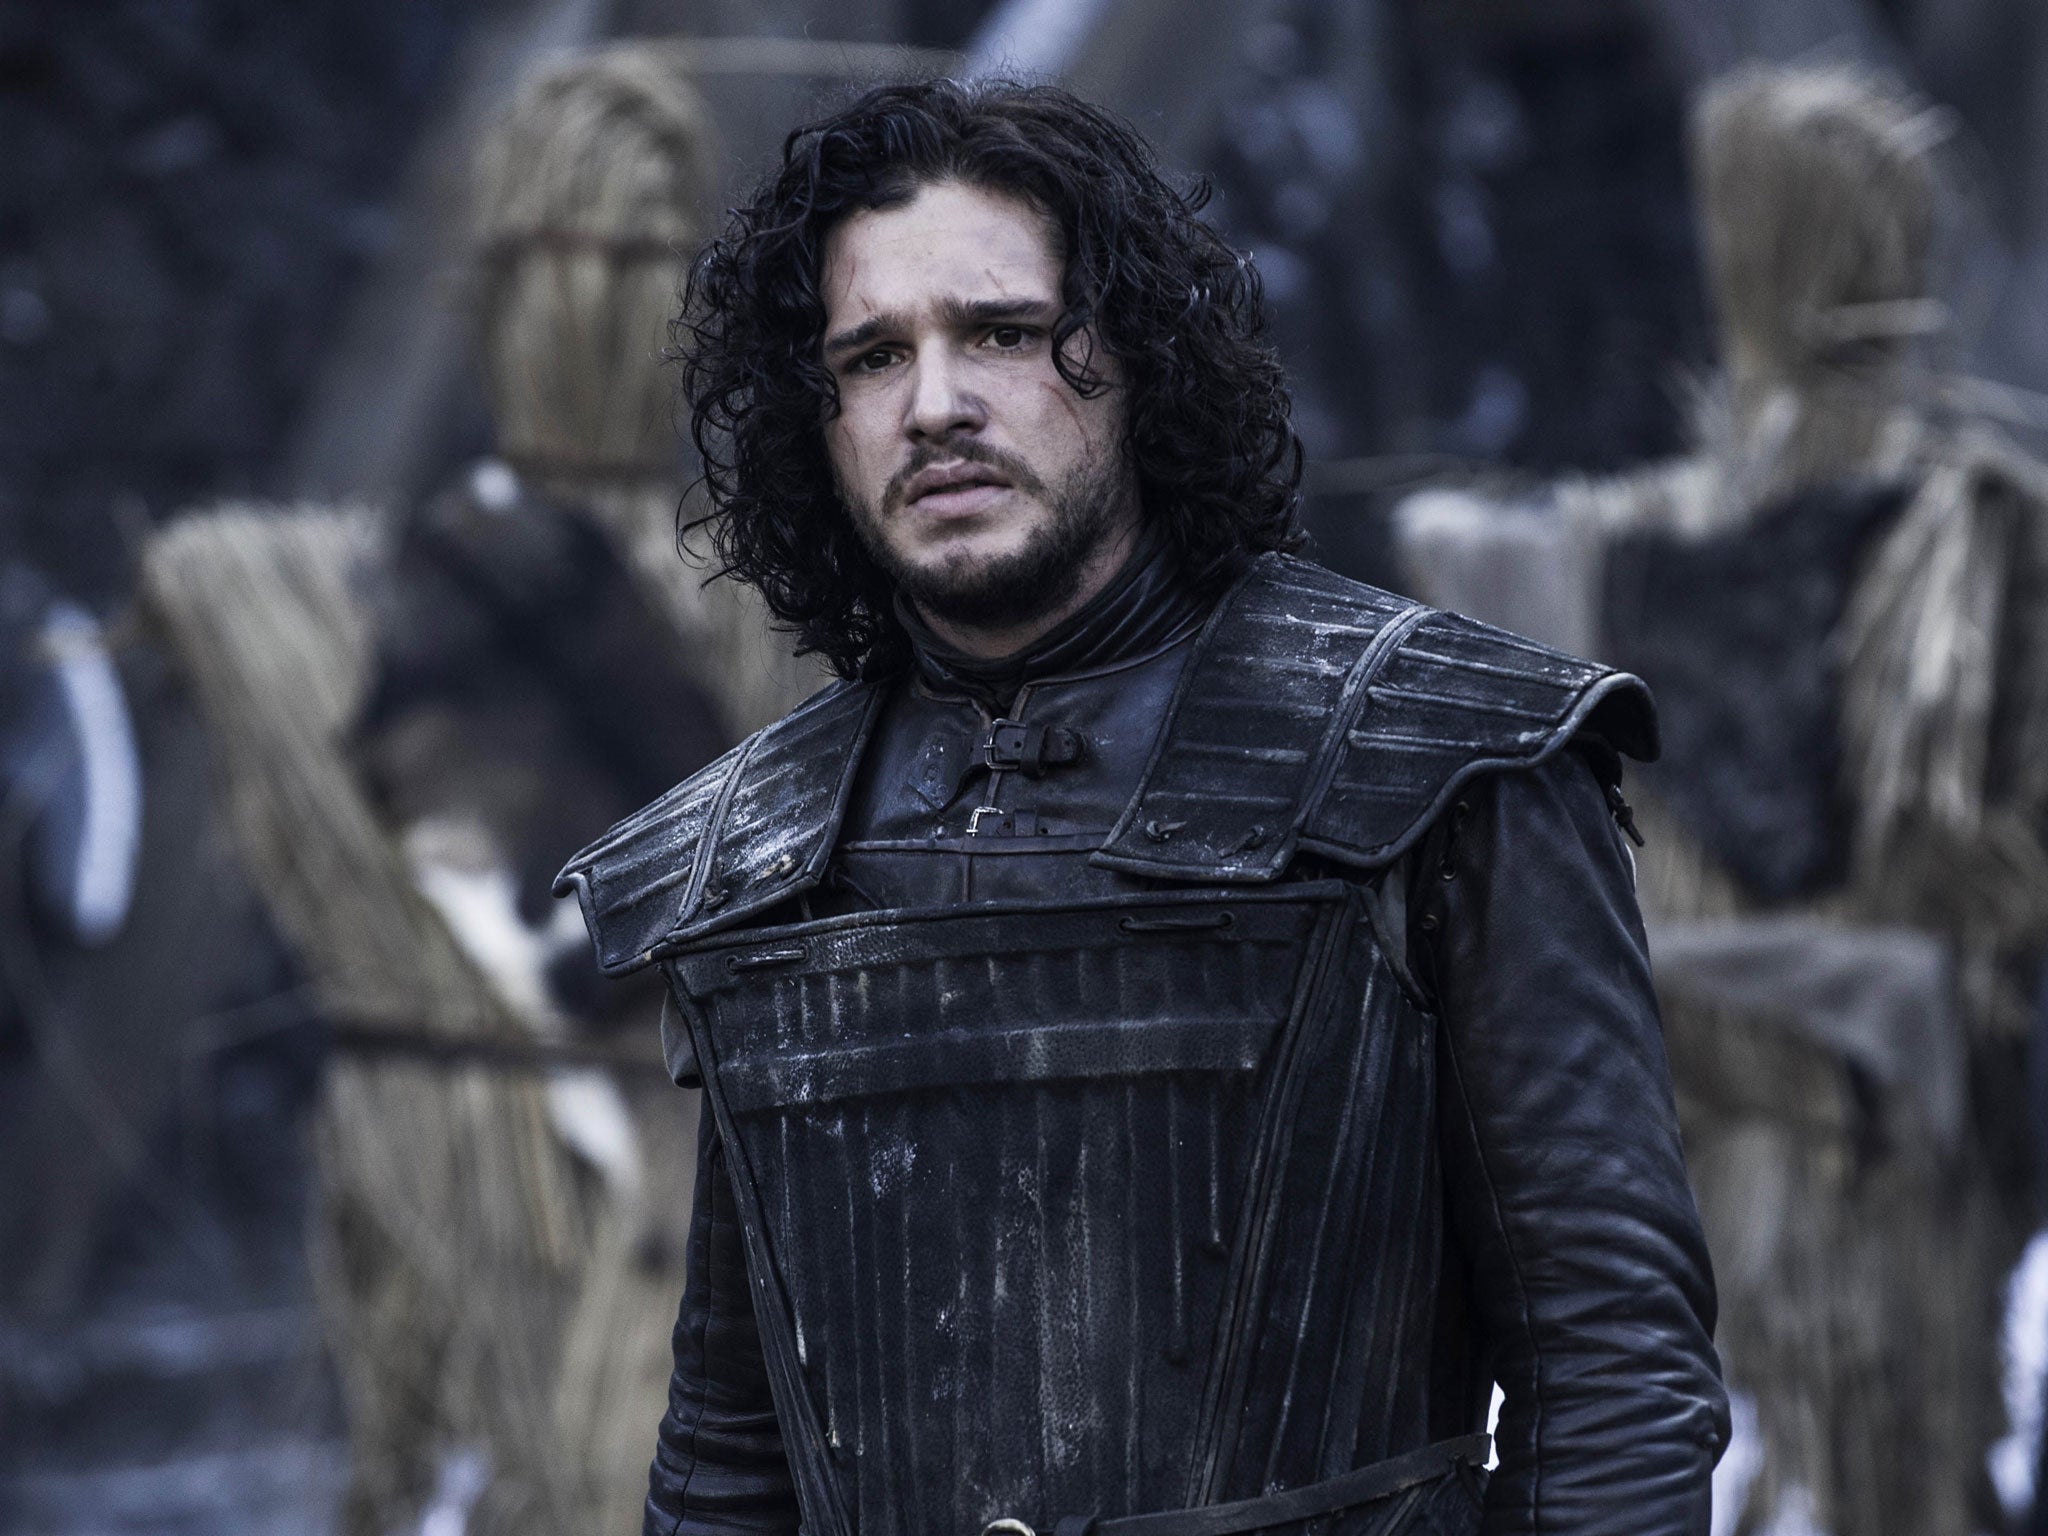 Kit Harington has been given a huge pay rise to extend his contract as Jon Snow in Game of Thrones